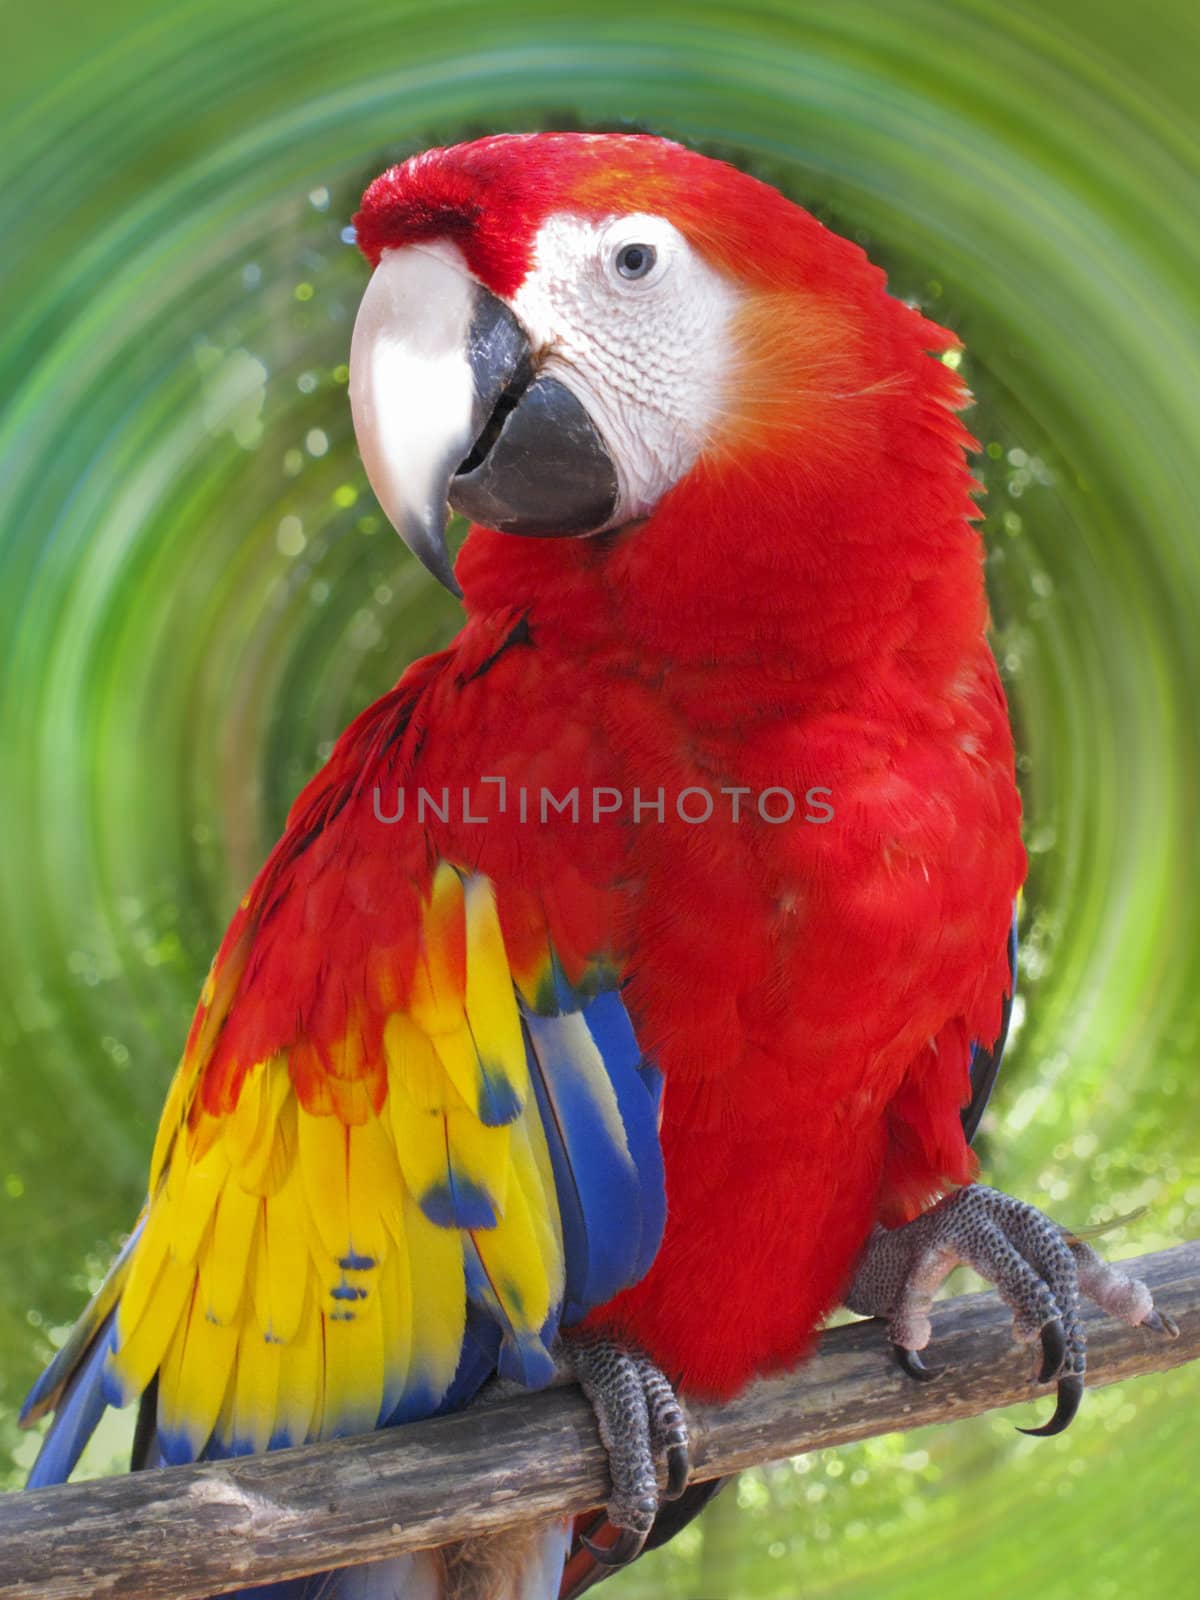 Macaw parrot against a green rotary background